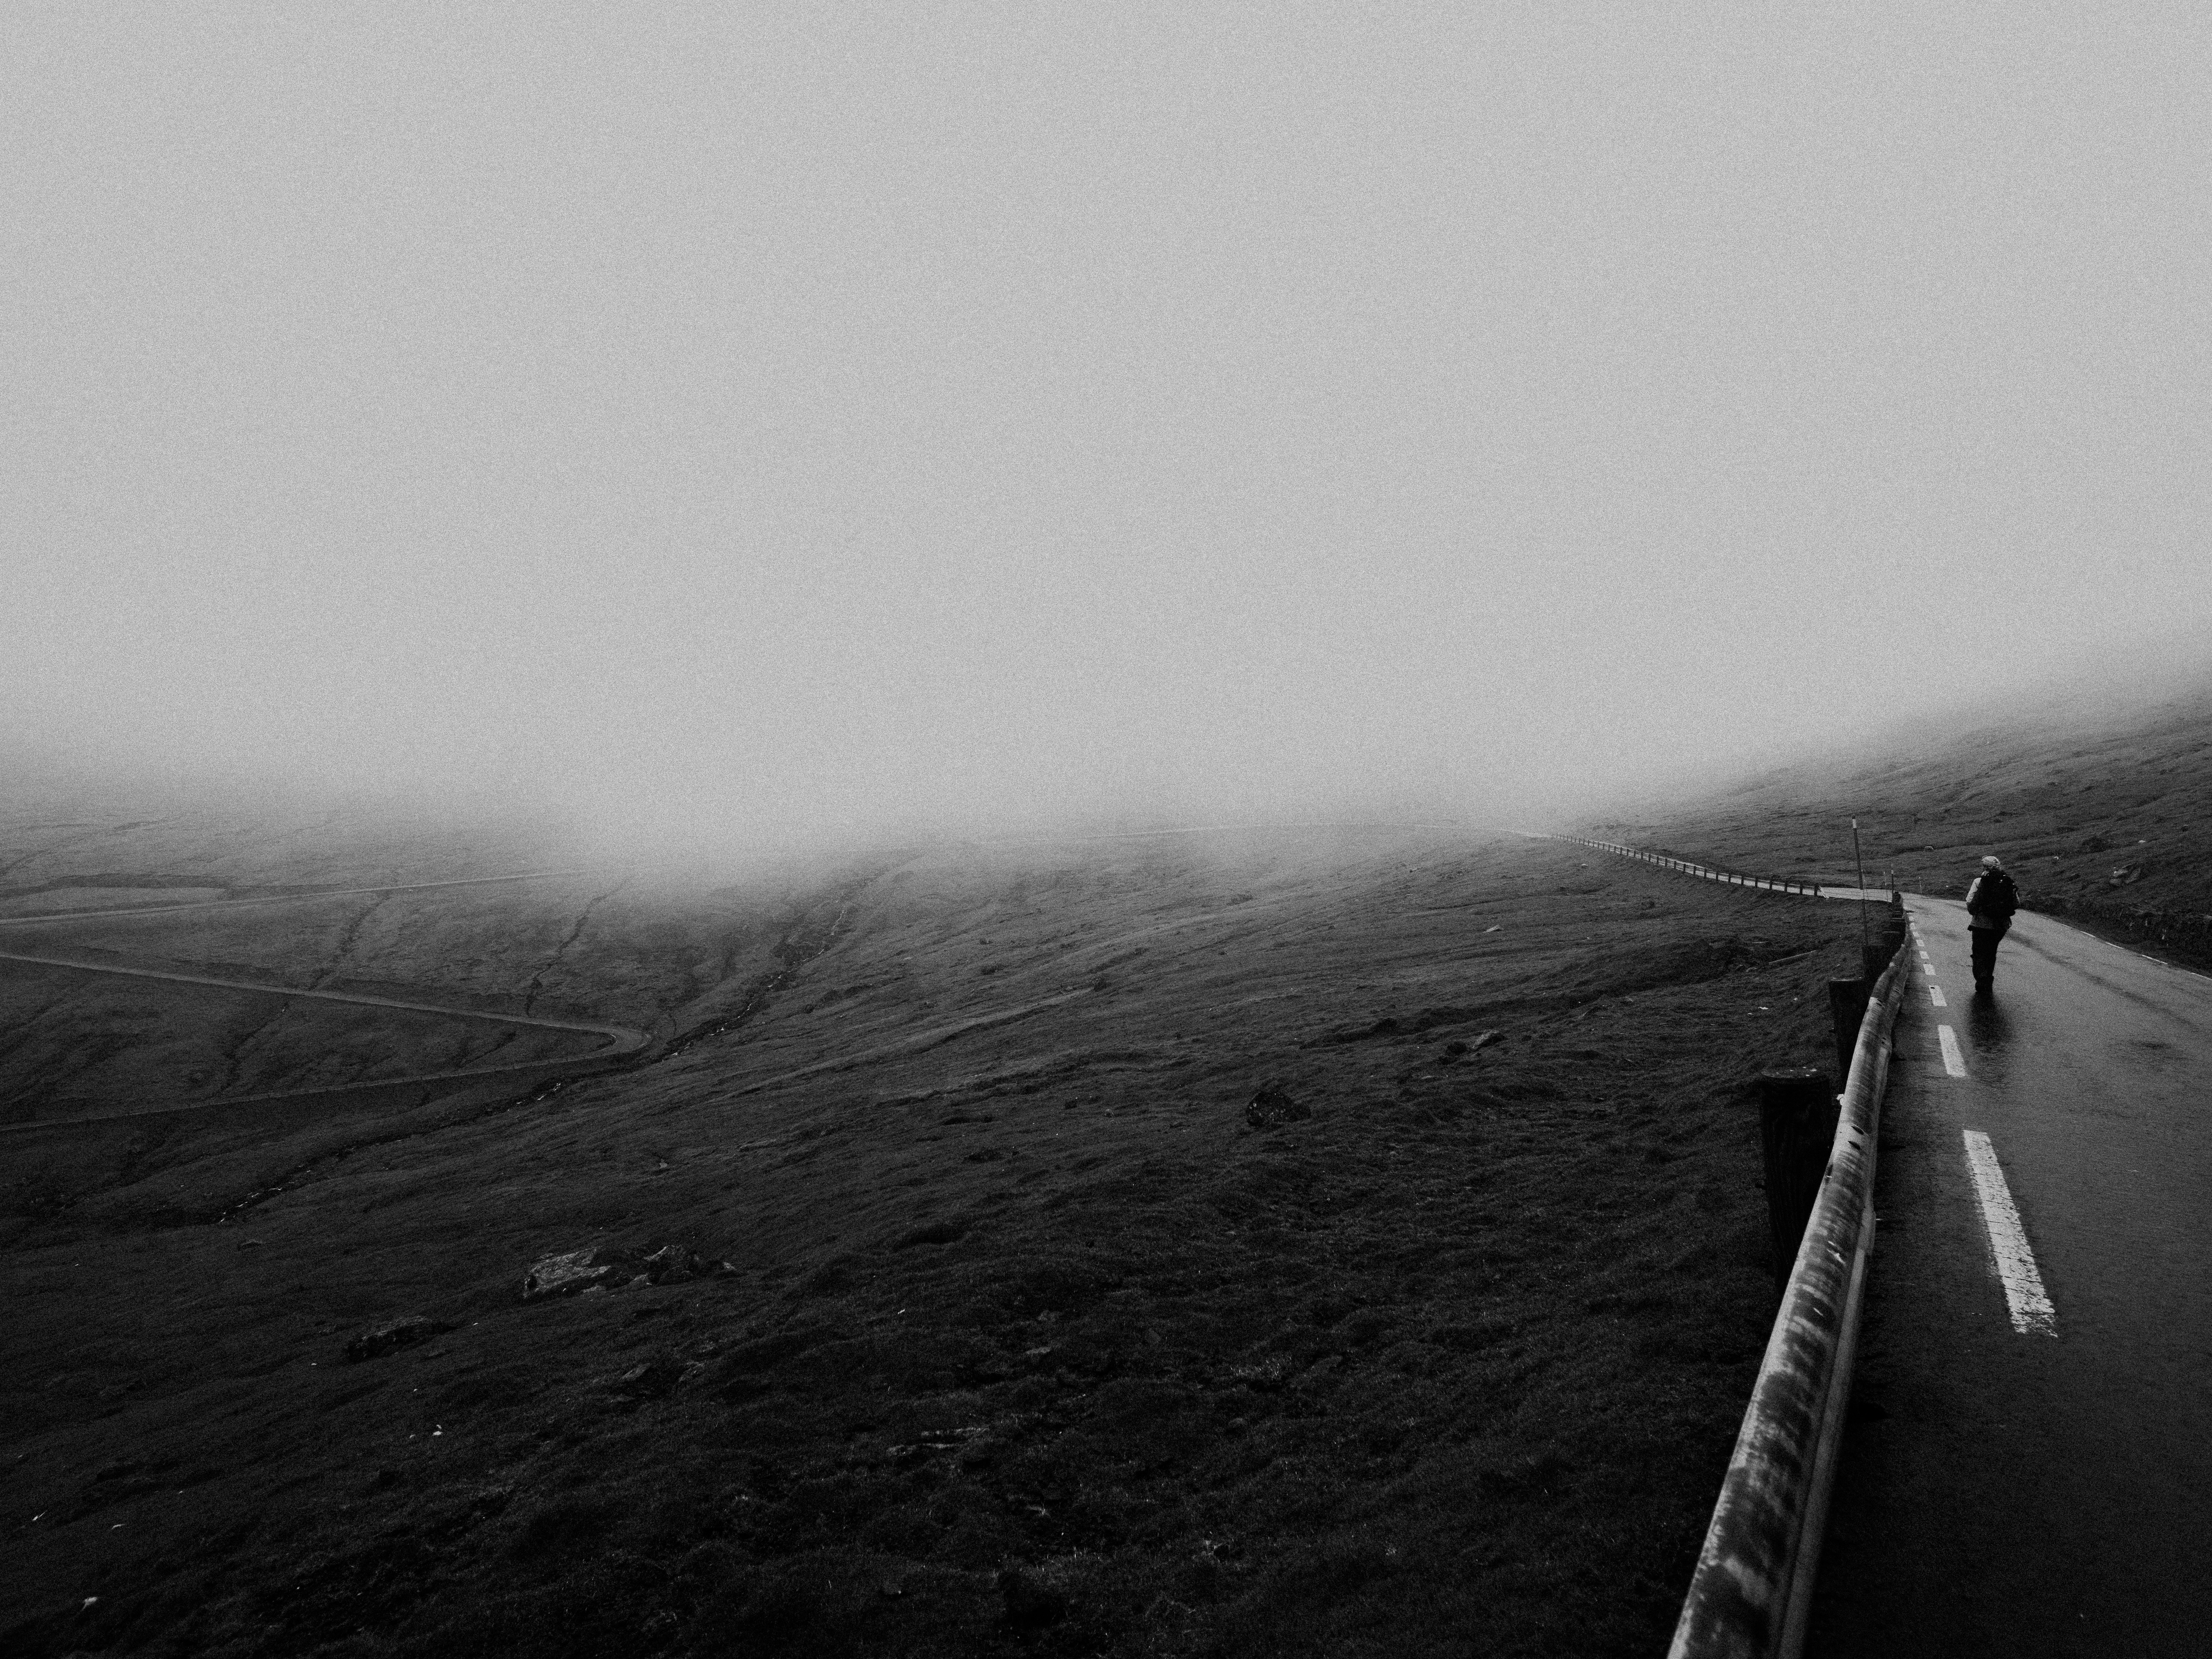 grayscale photo of a foggy mountain